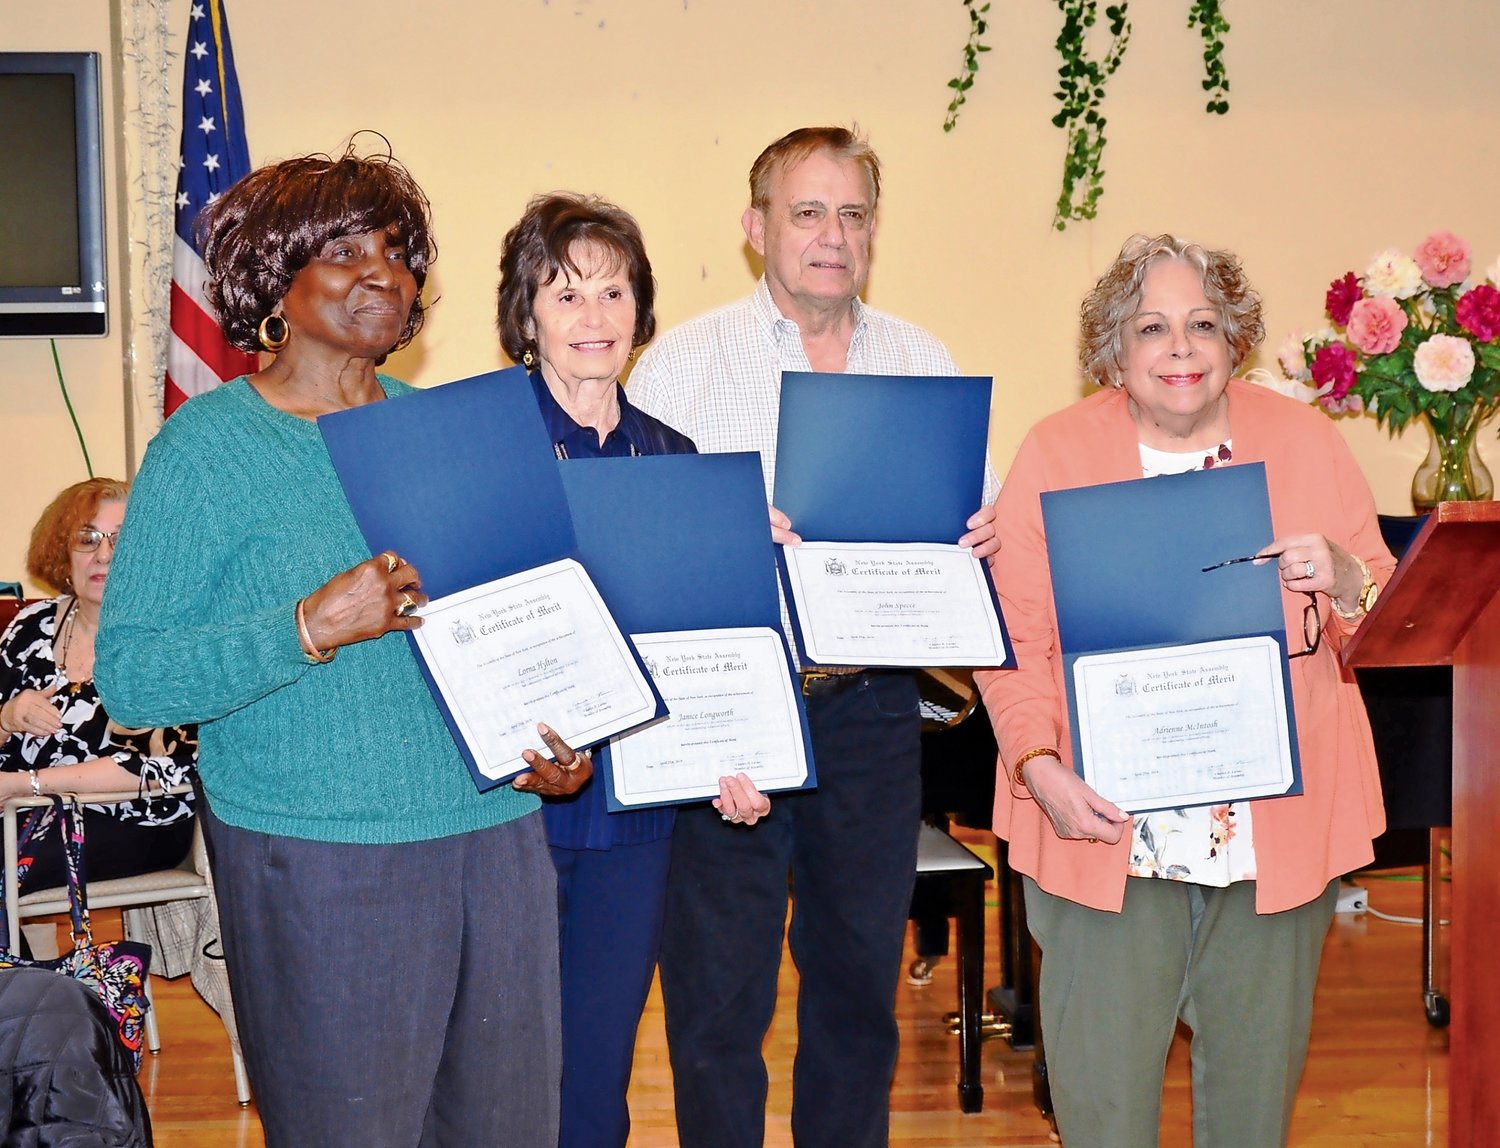 It was a proud day for Lorna Hylton, left, Janice Longworth, John Speece and Adrienne McIntosh, who were recognized for their volunteerism.